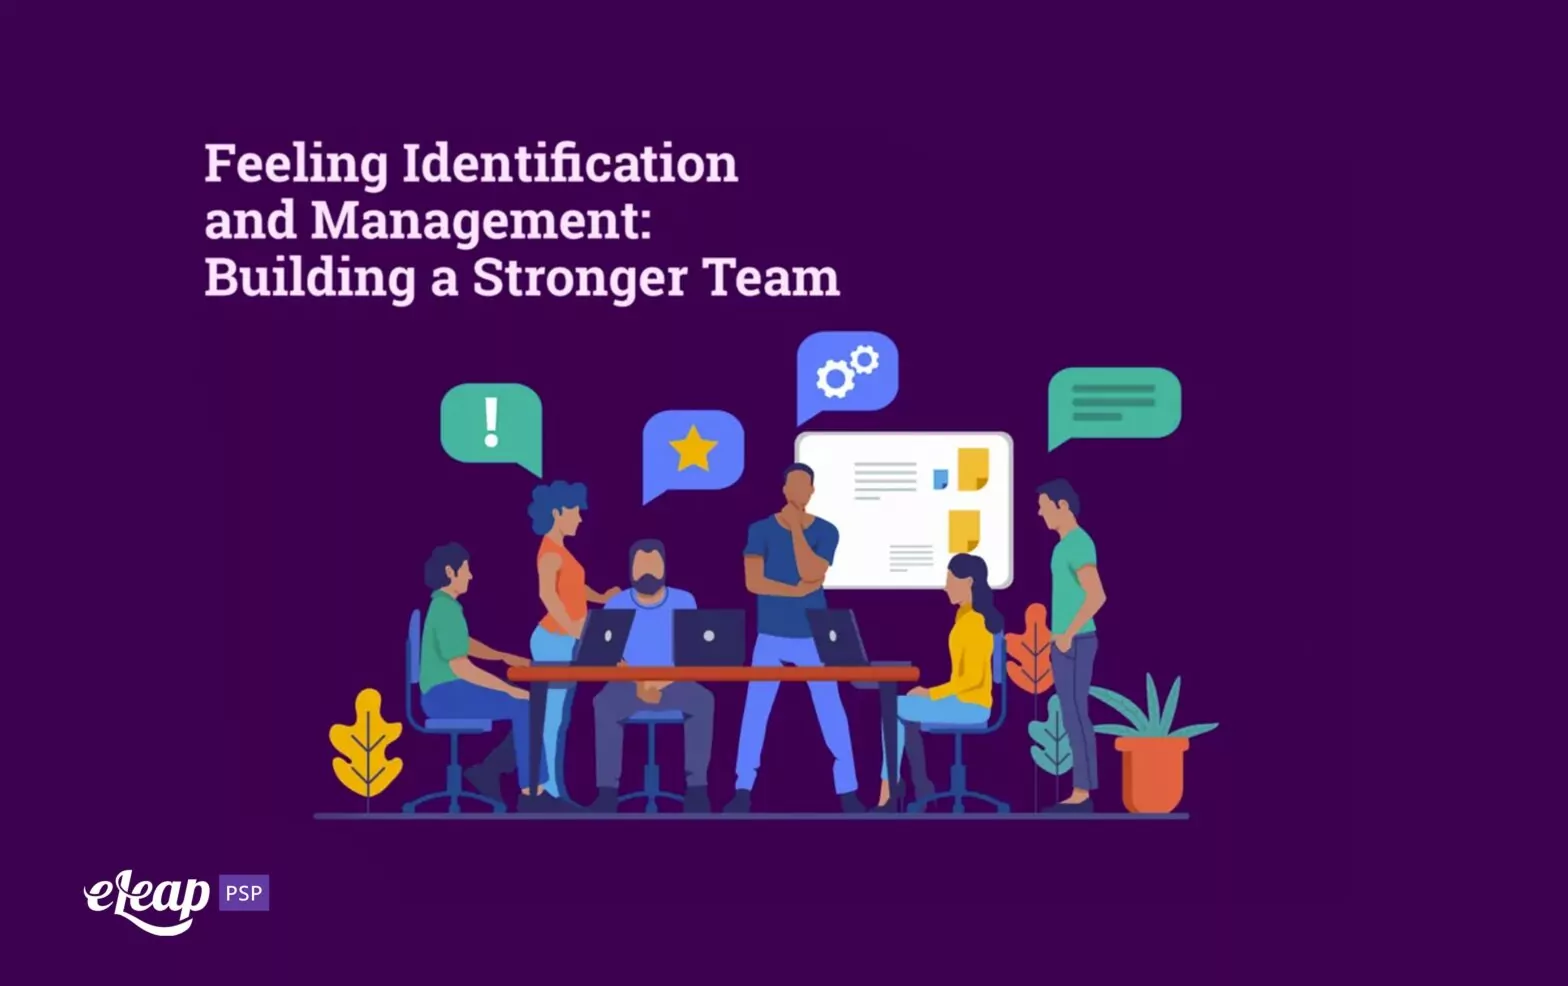 Feeling Identification and Management: Building a Stronger Team